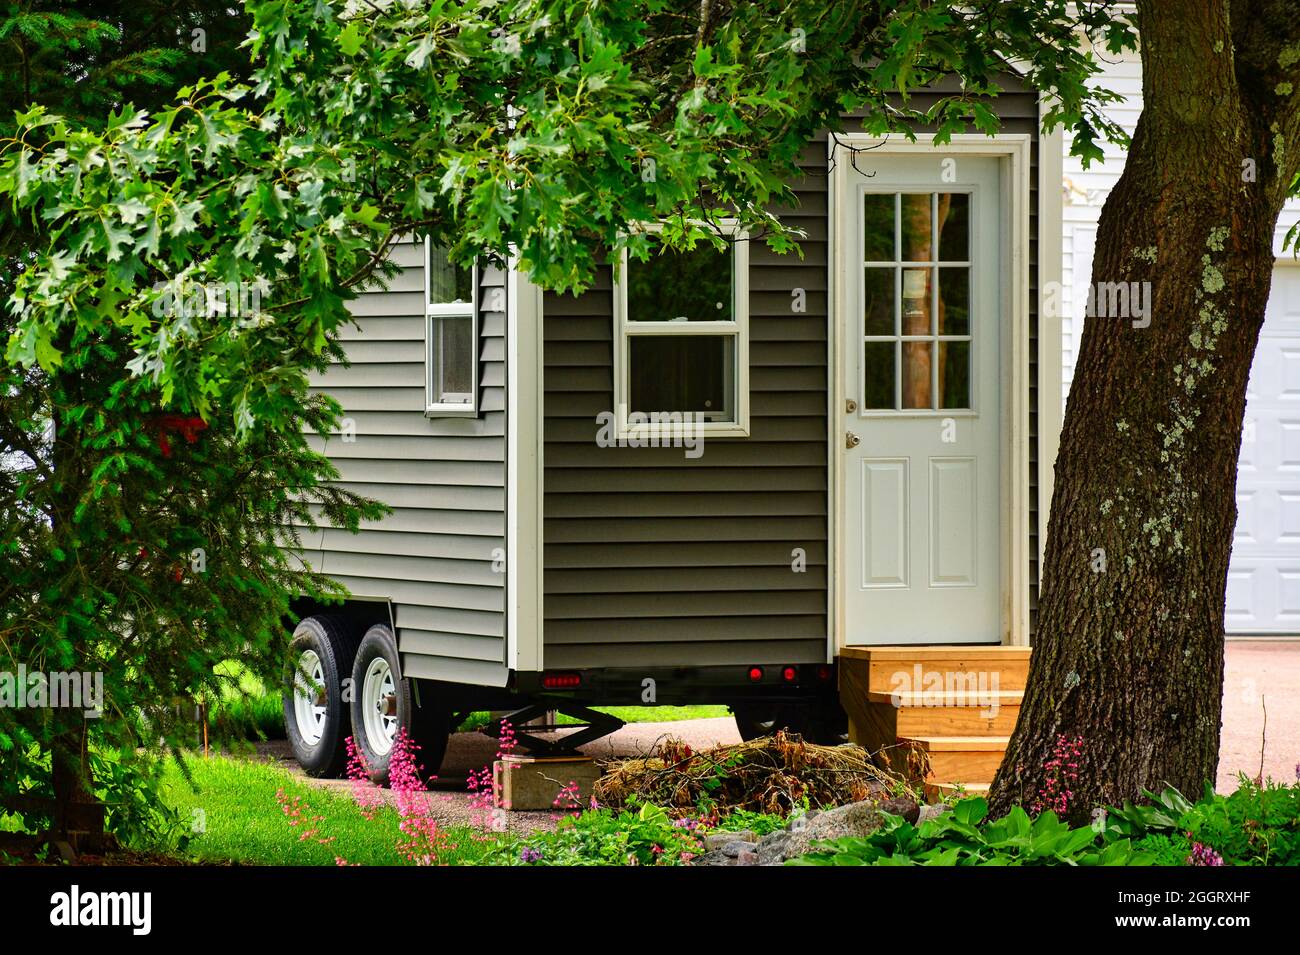 Tiny home on wheels framed by trees and flowers Stock Photo